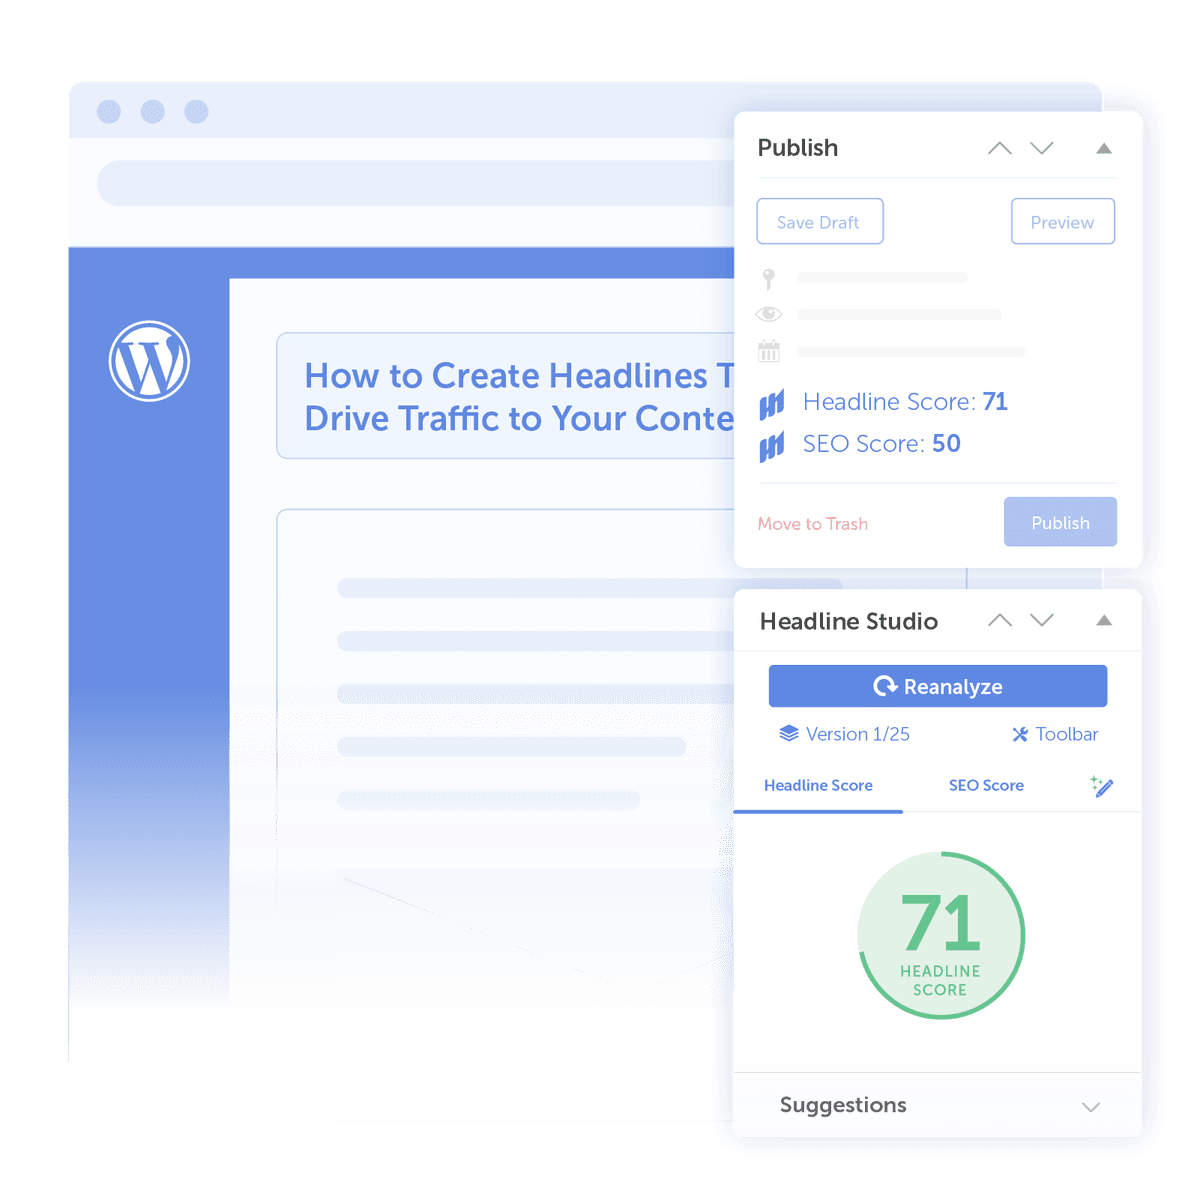 Score your headlines directly in the Wordpress posts you write.